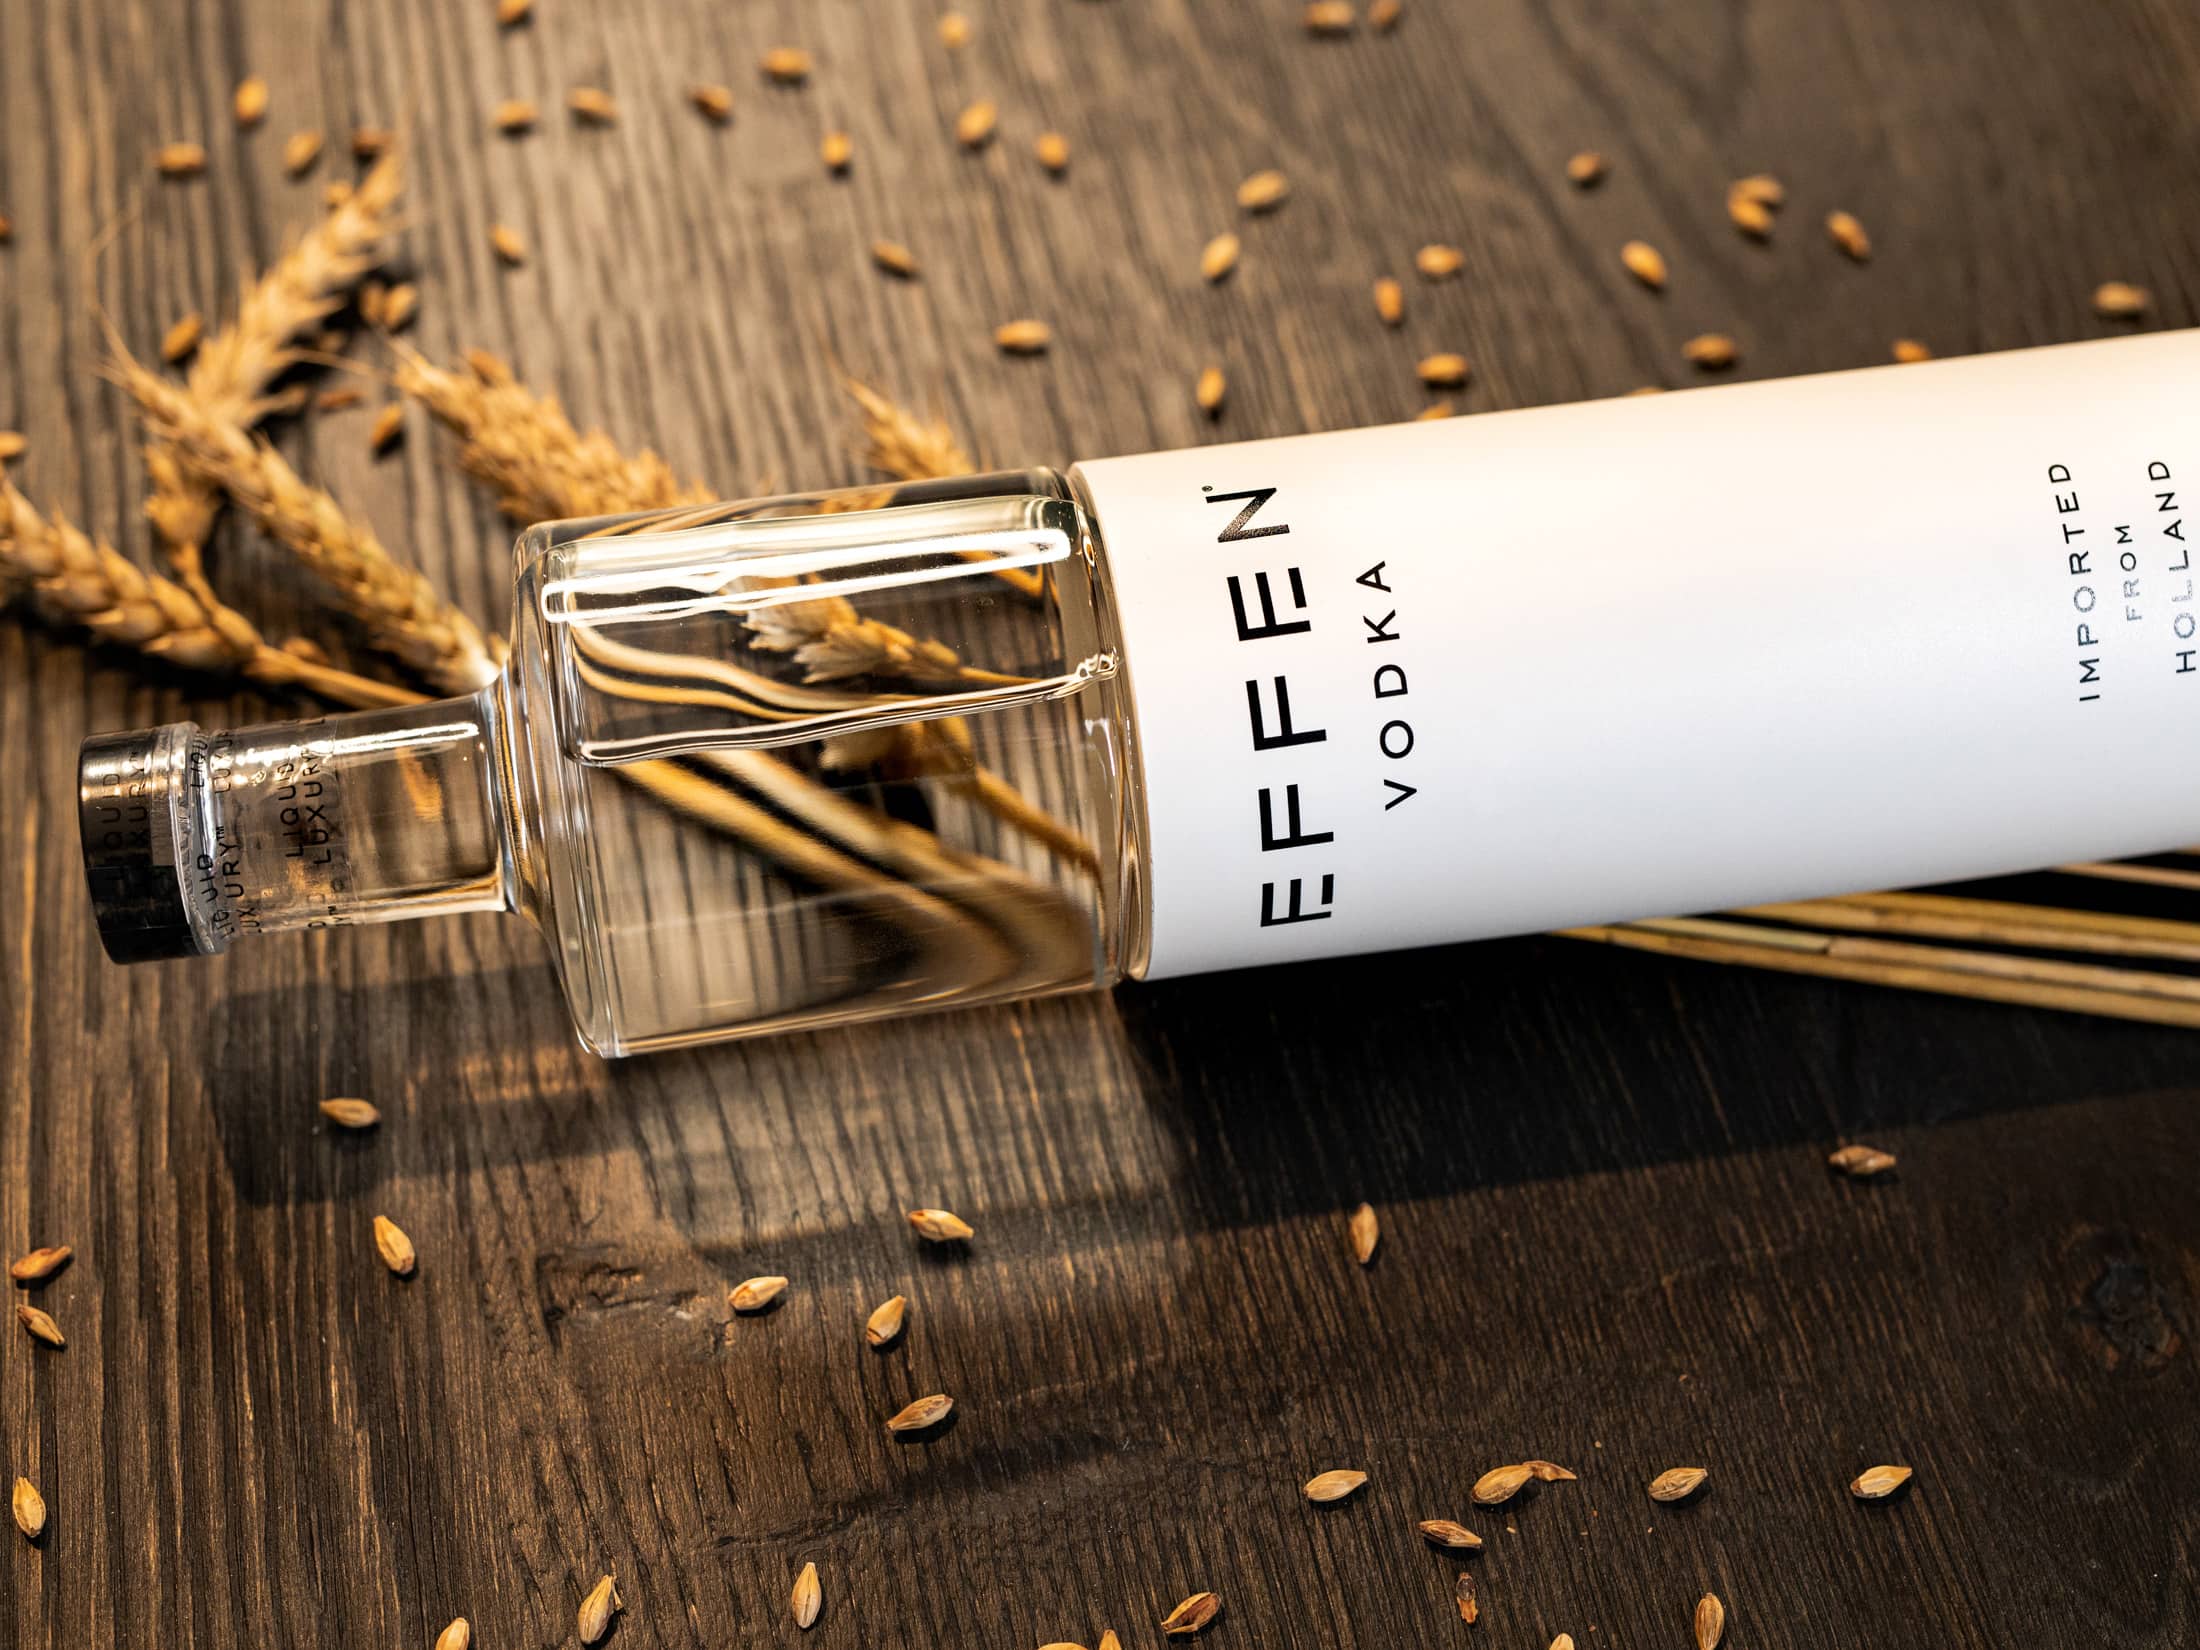 EFFEN Vodka is based on a century-old Dutch recipe, which includes premium wheat from Holland.